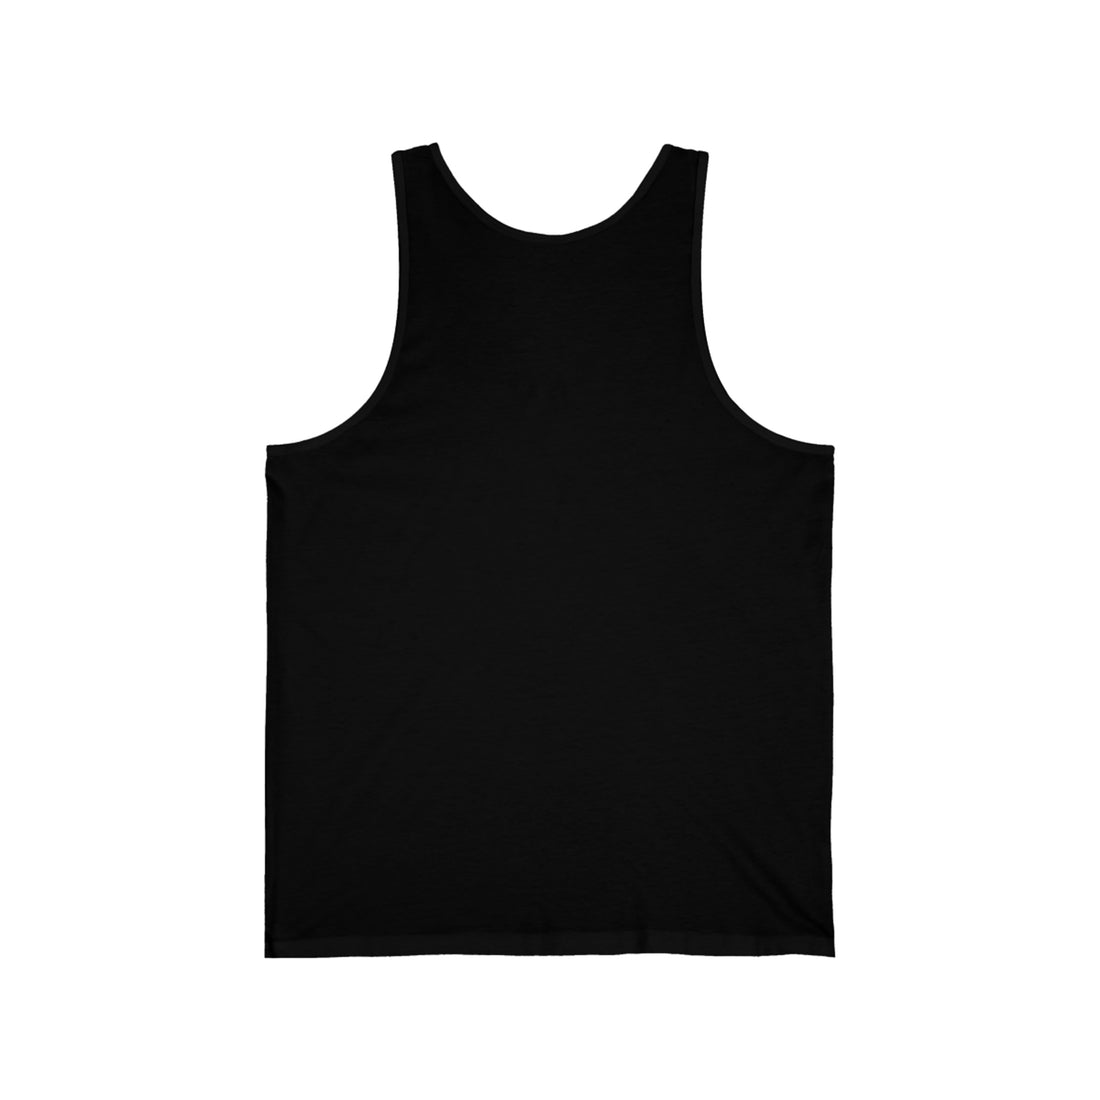 Motivated By Cats &amp; Caffeine - Unisex Jersey Tank Top